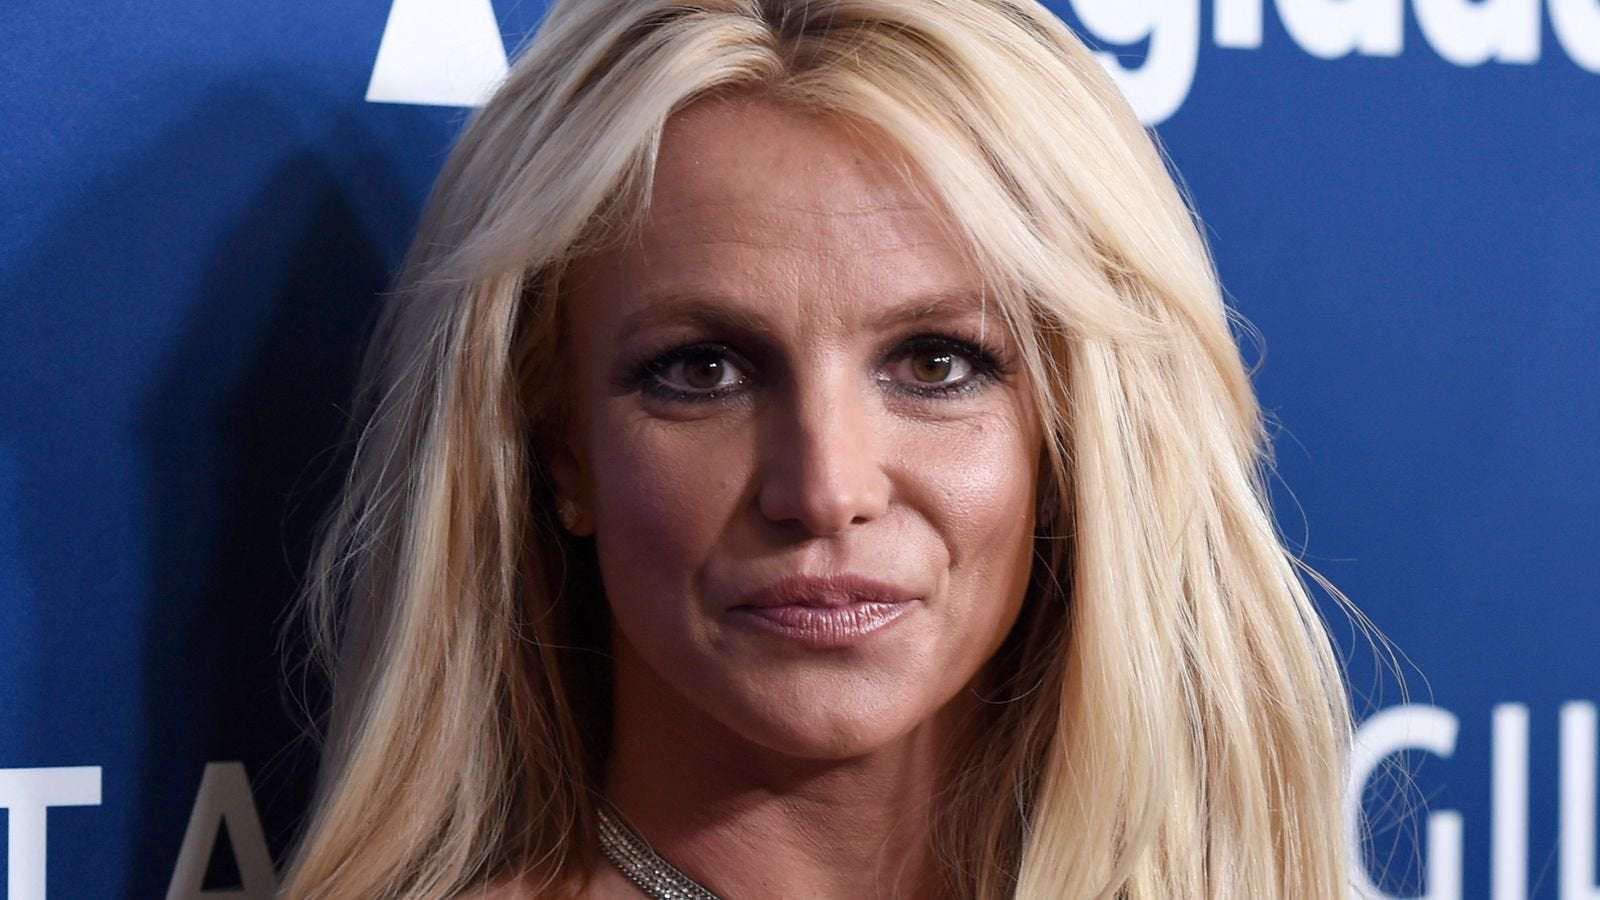 image for Britney Spears' conservatorship is brought to an end after 13 years